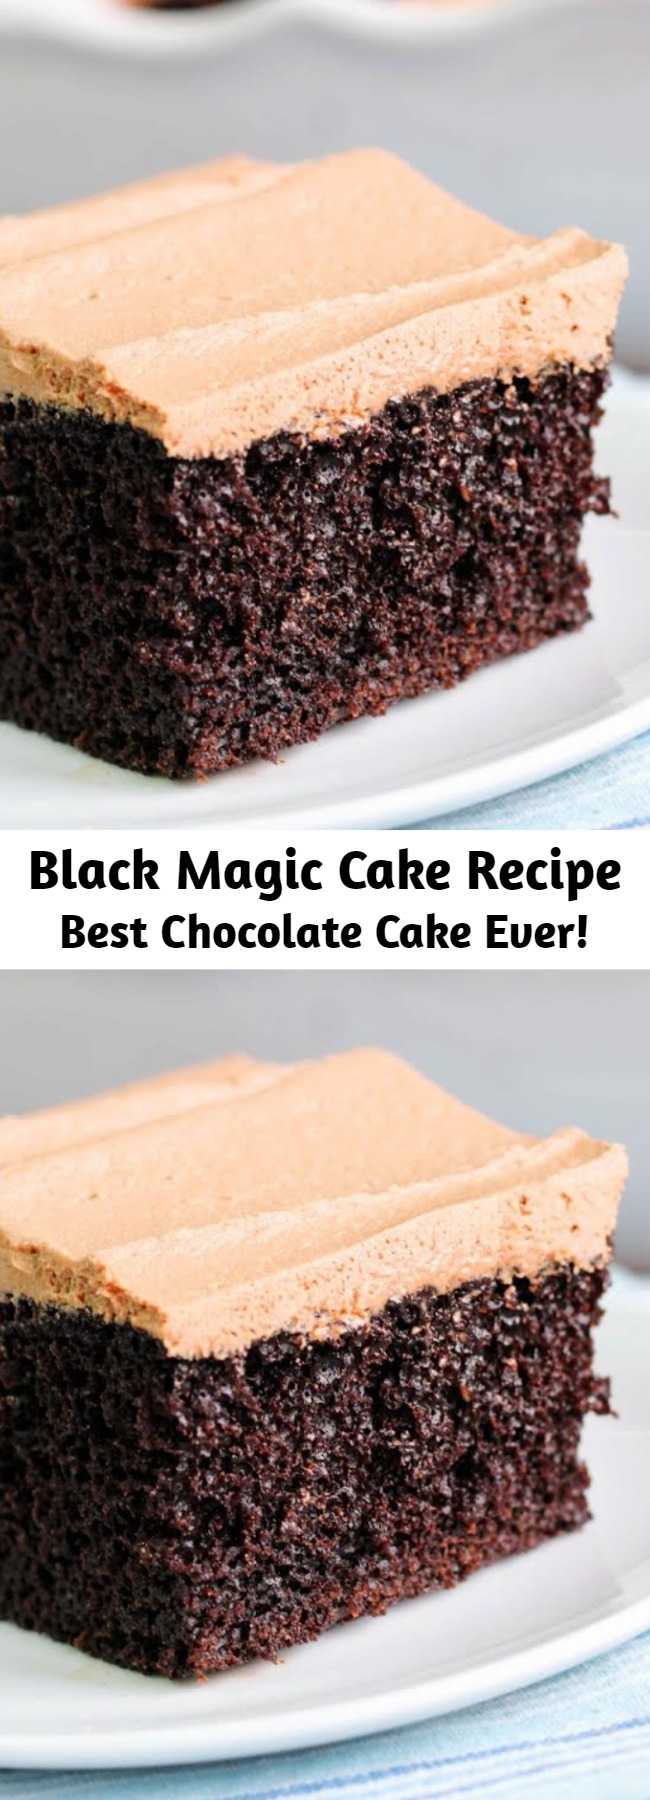 Black Magic Cake Recipe (Best Chocolate Cake Ever!) - It's a chocolate lovers dream. Simple and straightforward, this is one of those recipes that everyone will love. Coffee enhances the chocolate flavor and buttermilk helps make the cake moist. We don't use margarine often for frosting, but this chocolate one is so good it made a believer out of us. It's perfect on top of the chocolaty cake. Be sure to have plenty of milk on hand.